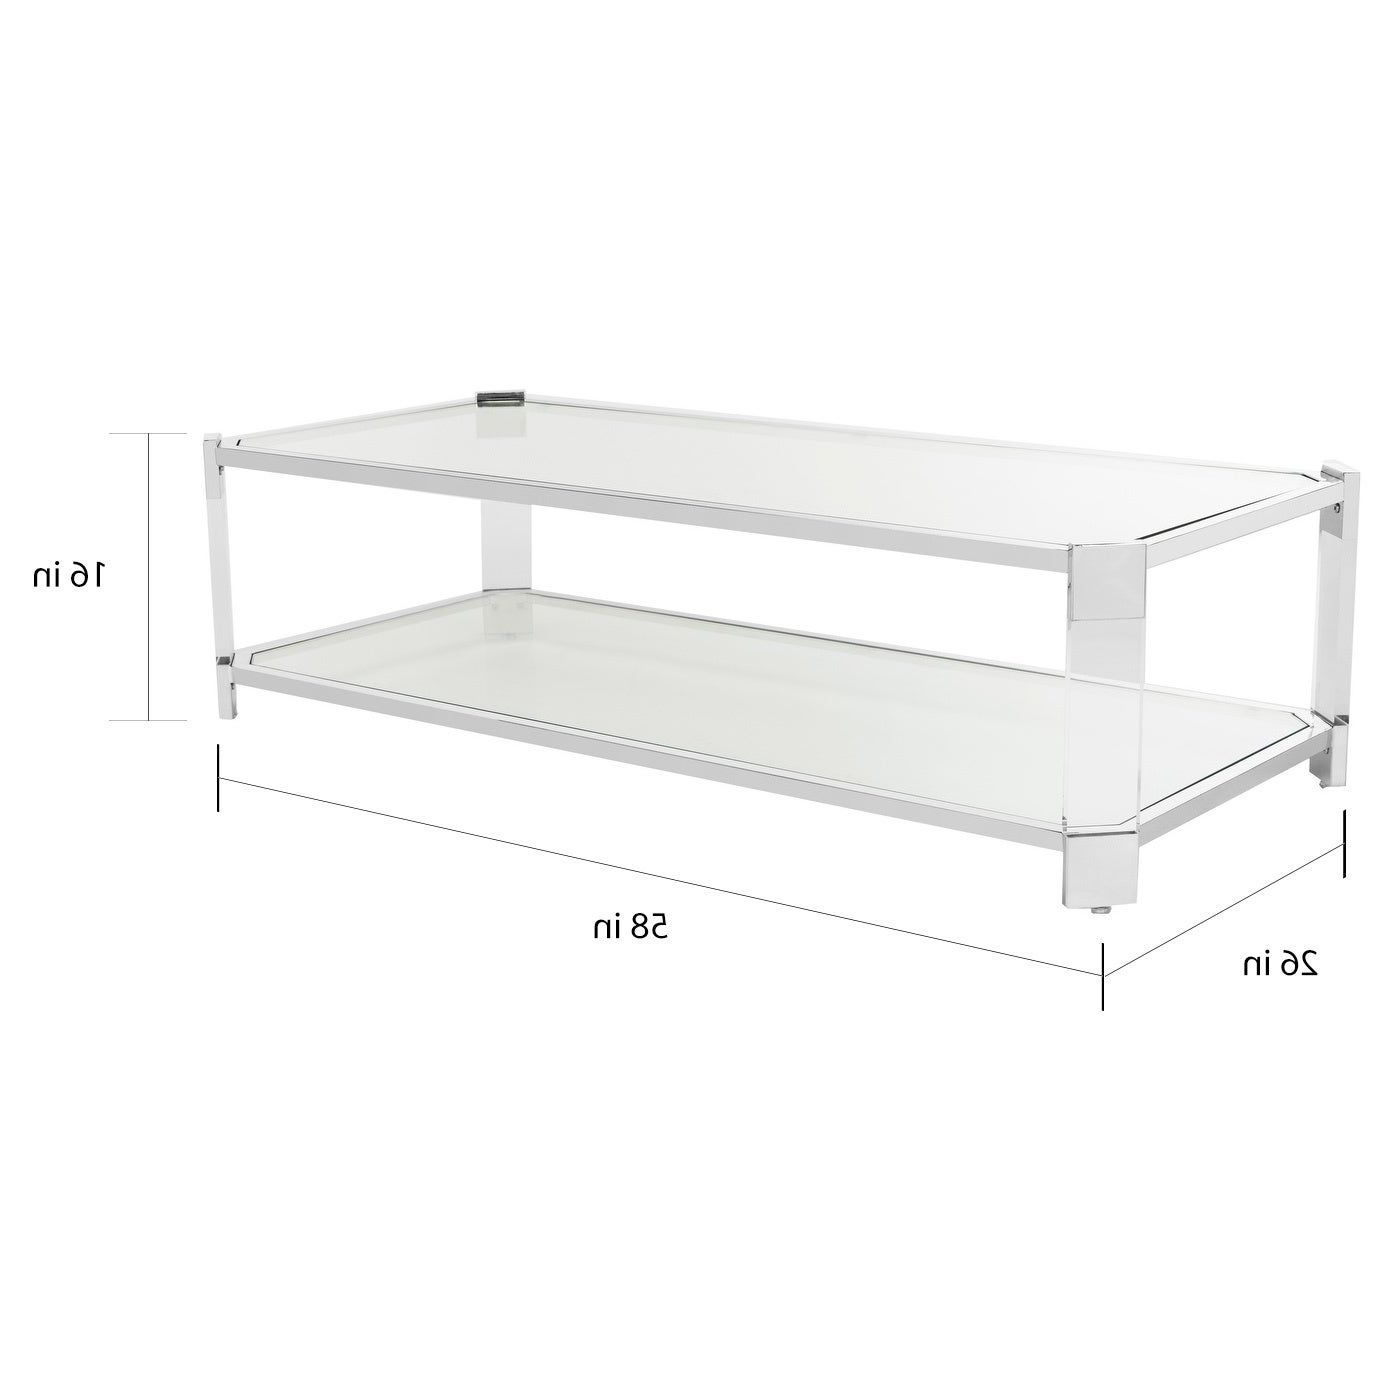 Safavieh Couture Gianna Glass Coffee Table  Clear – 58 In W X 26 In D X 16  In H In Best And Newest Safavieh Couture Gianna Glass Coffee Tables (View 4 of 20)